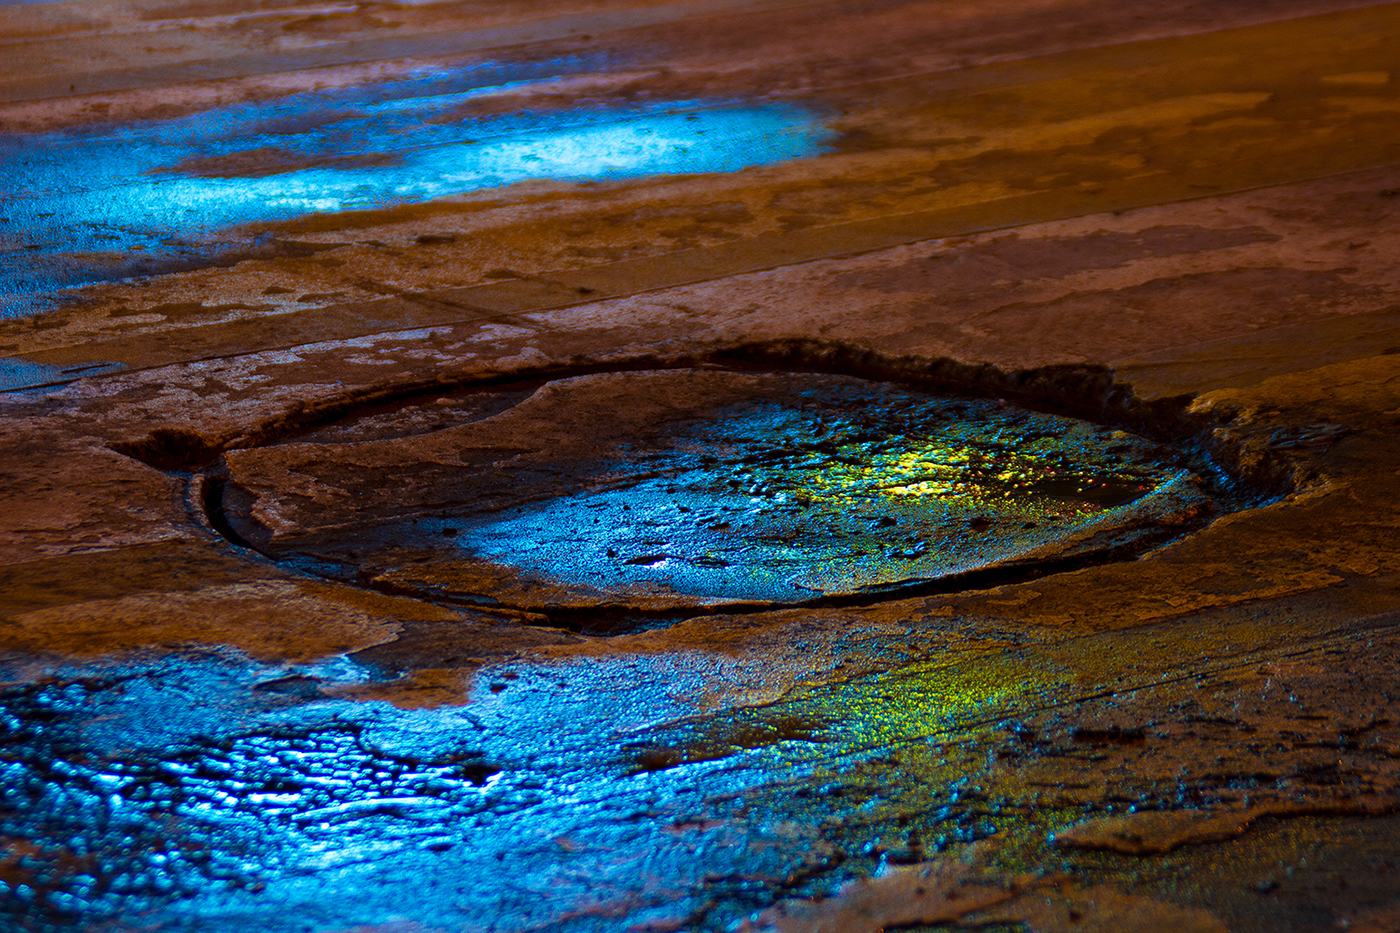 Flaws neon mirror night acid water lights colorful streets road